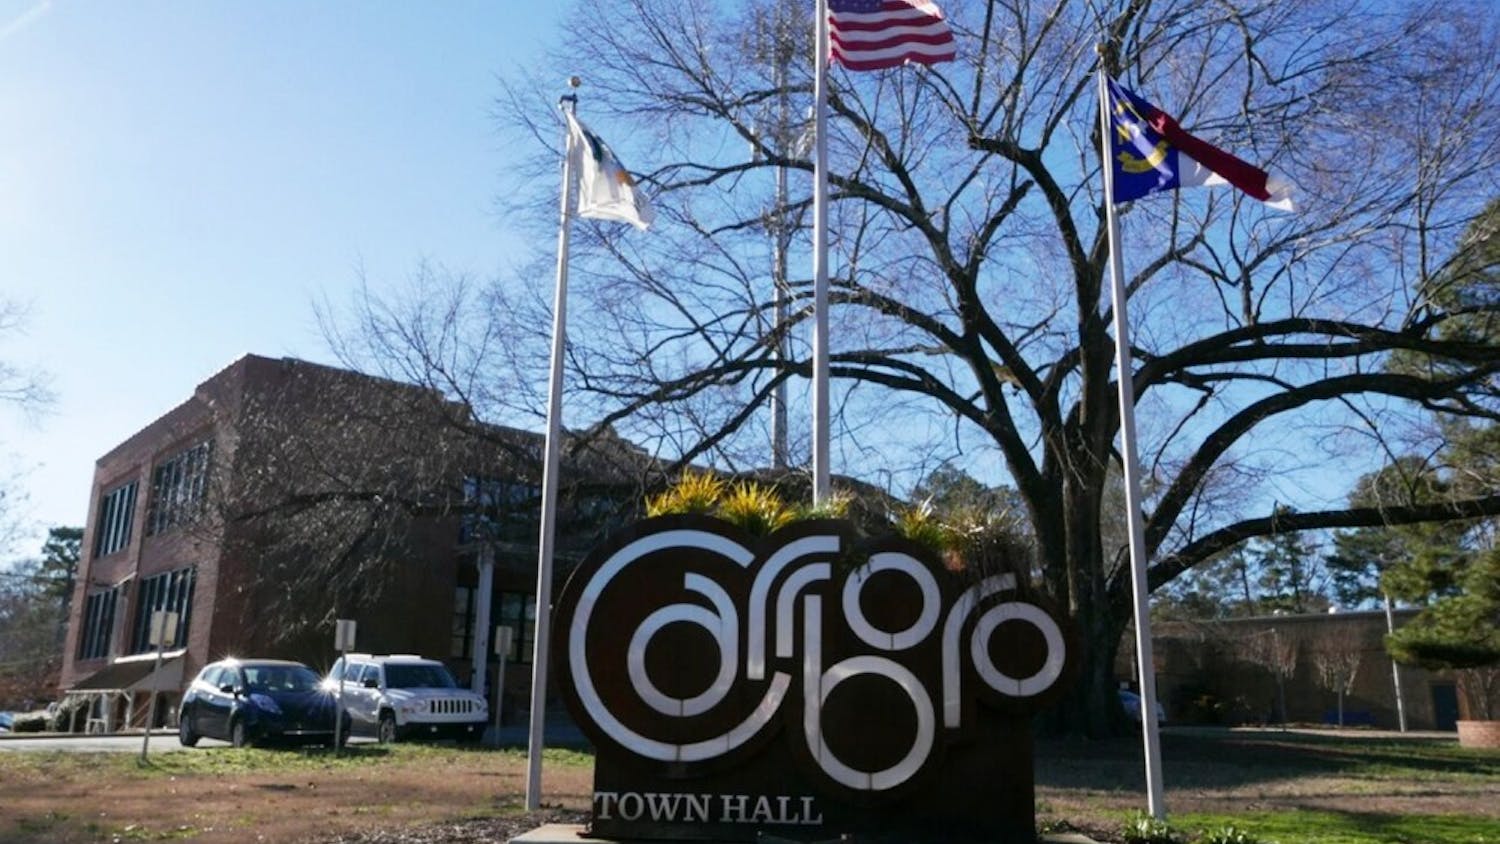 Carrboro town sign